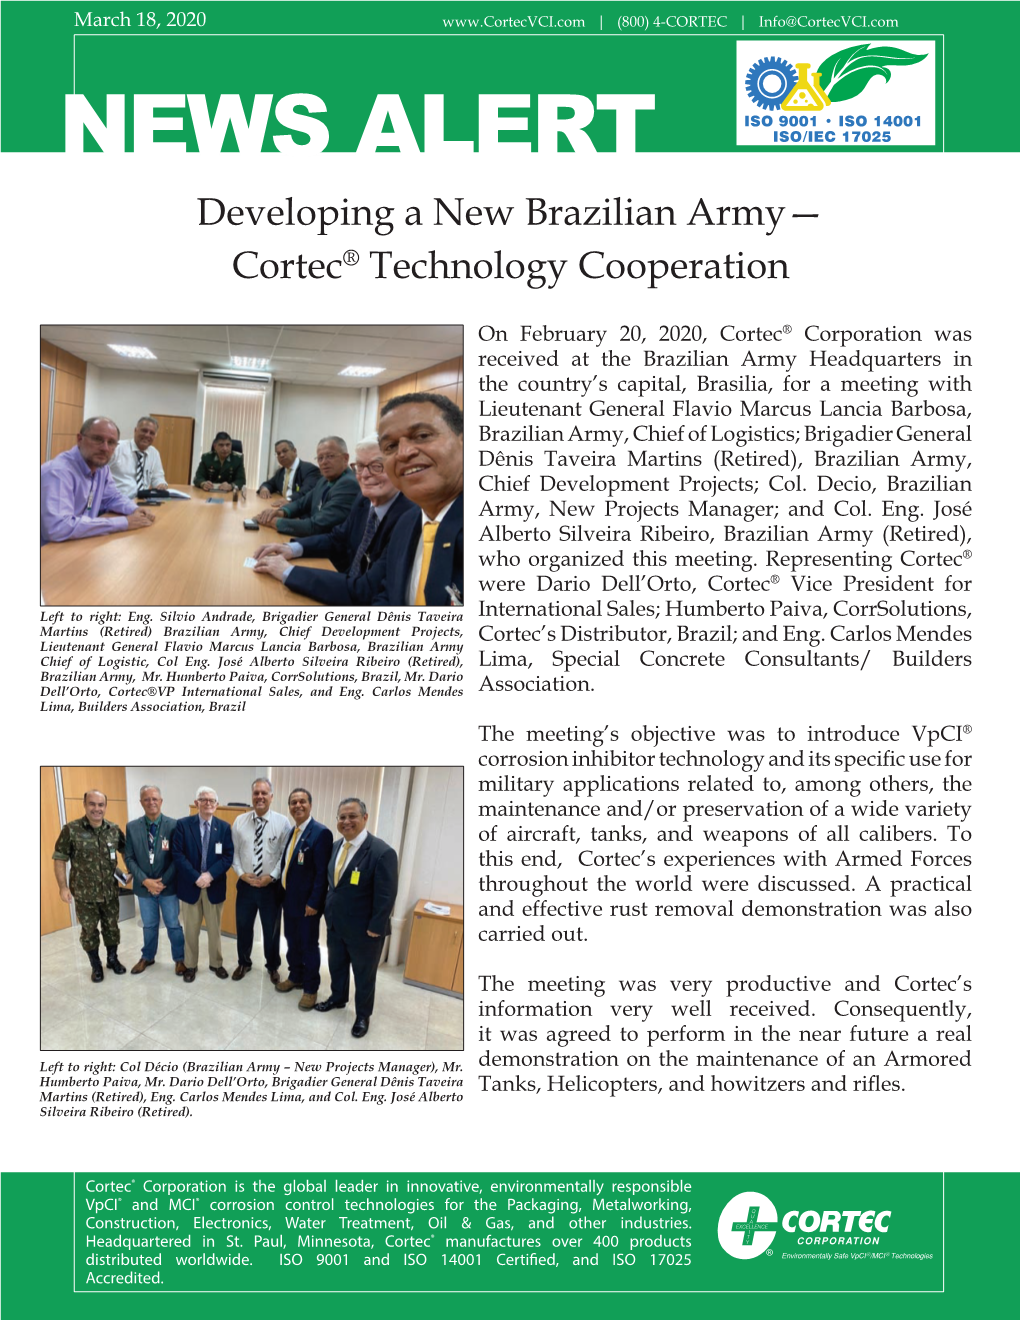 NEWS ALERT Developing a New Brazilian Army— Cortec® Technology Cooperation